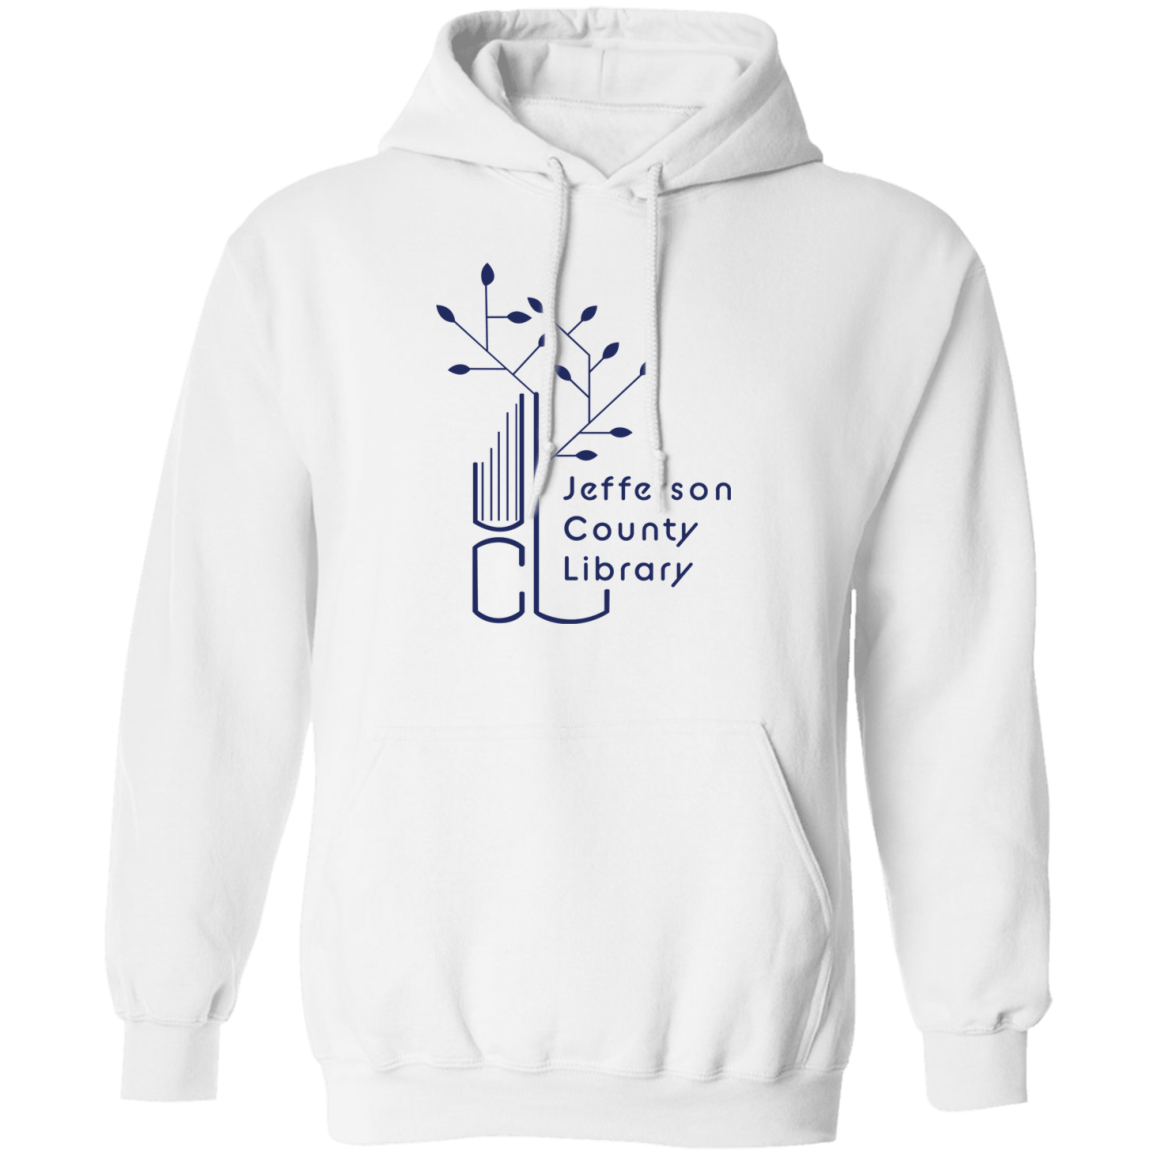 Jefferson County Library Hoodies